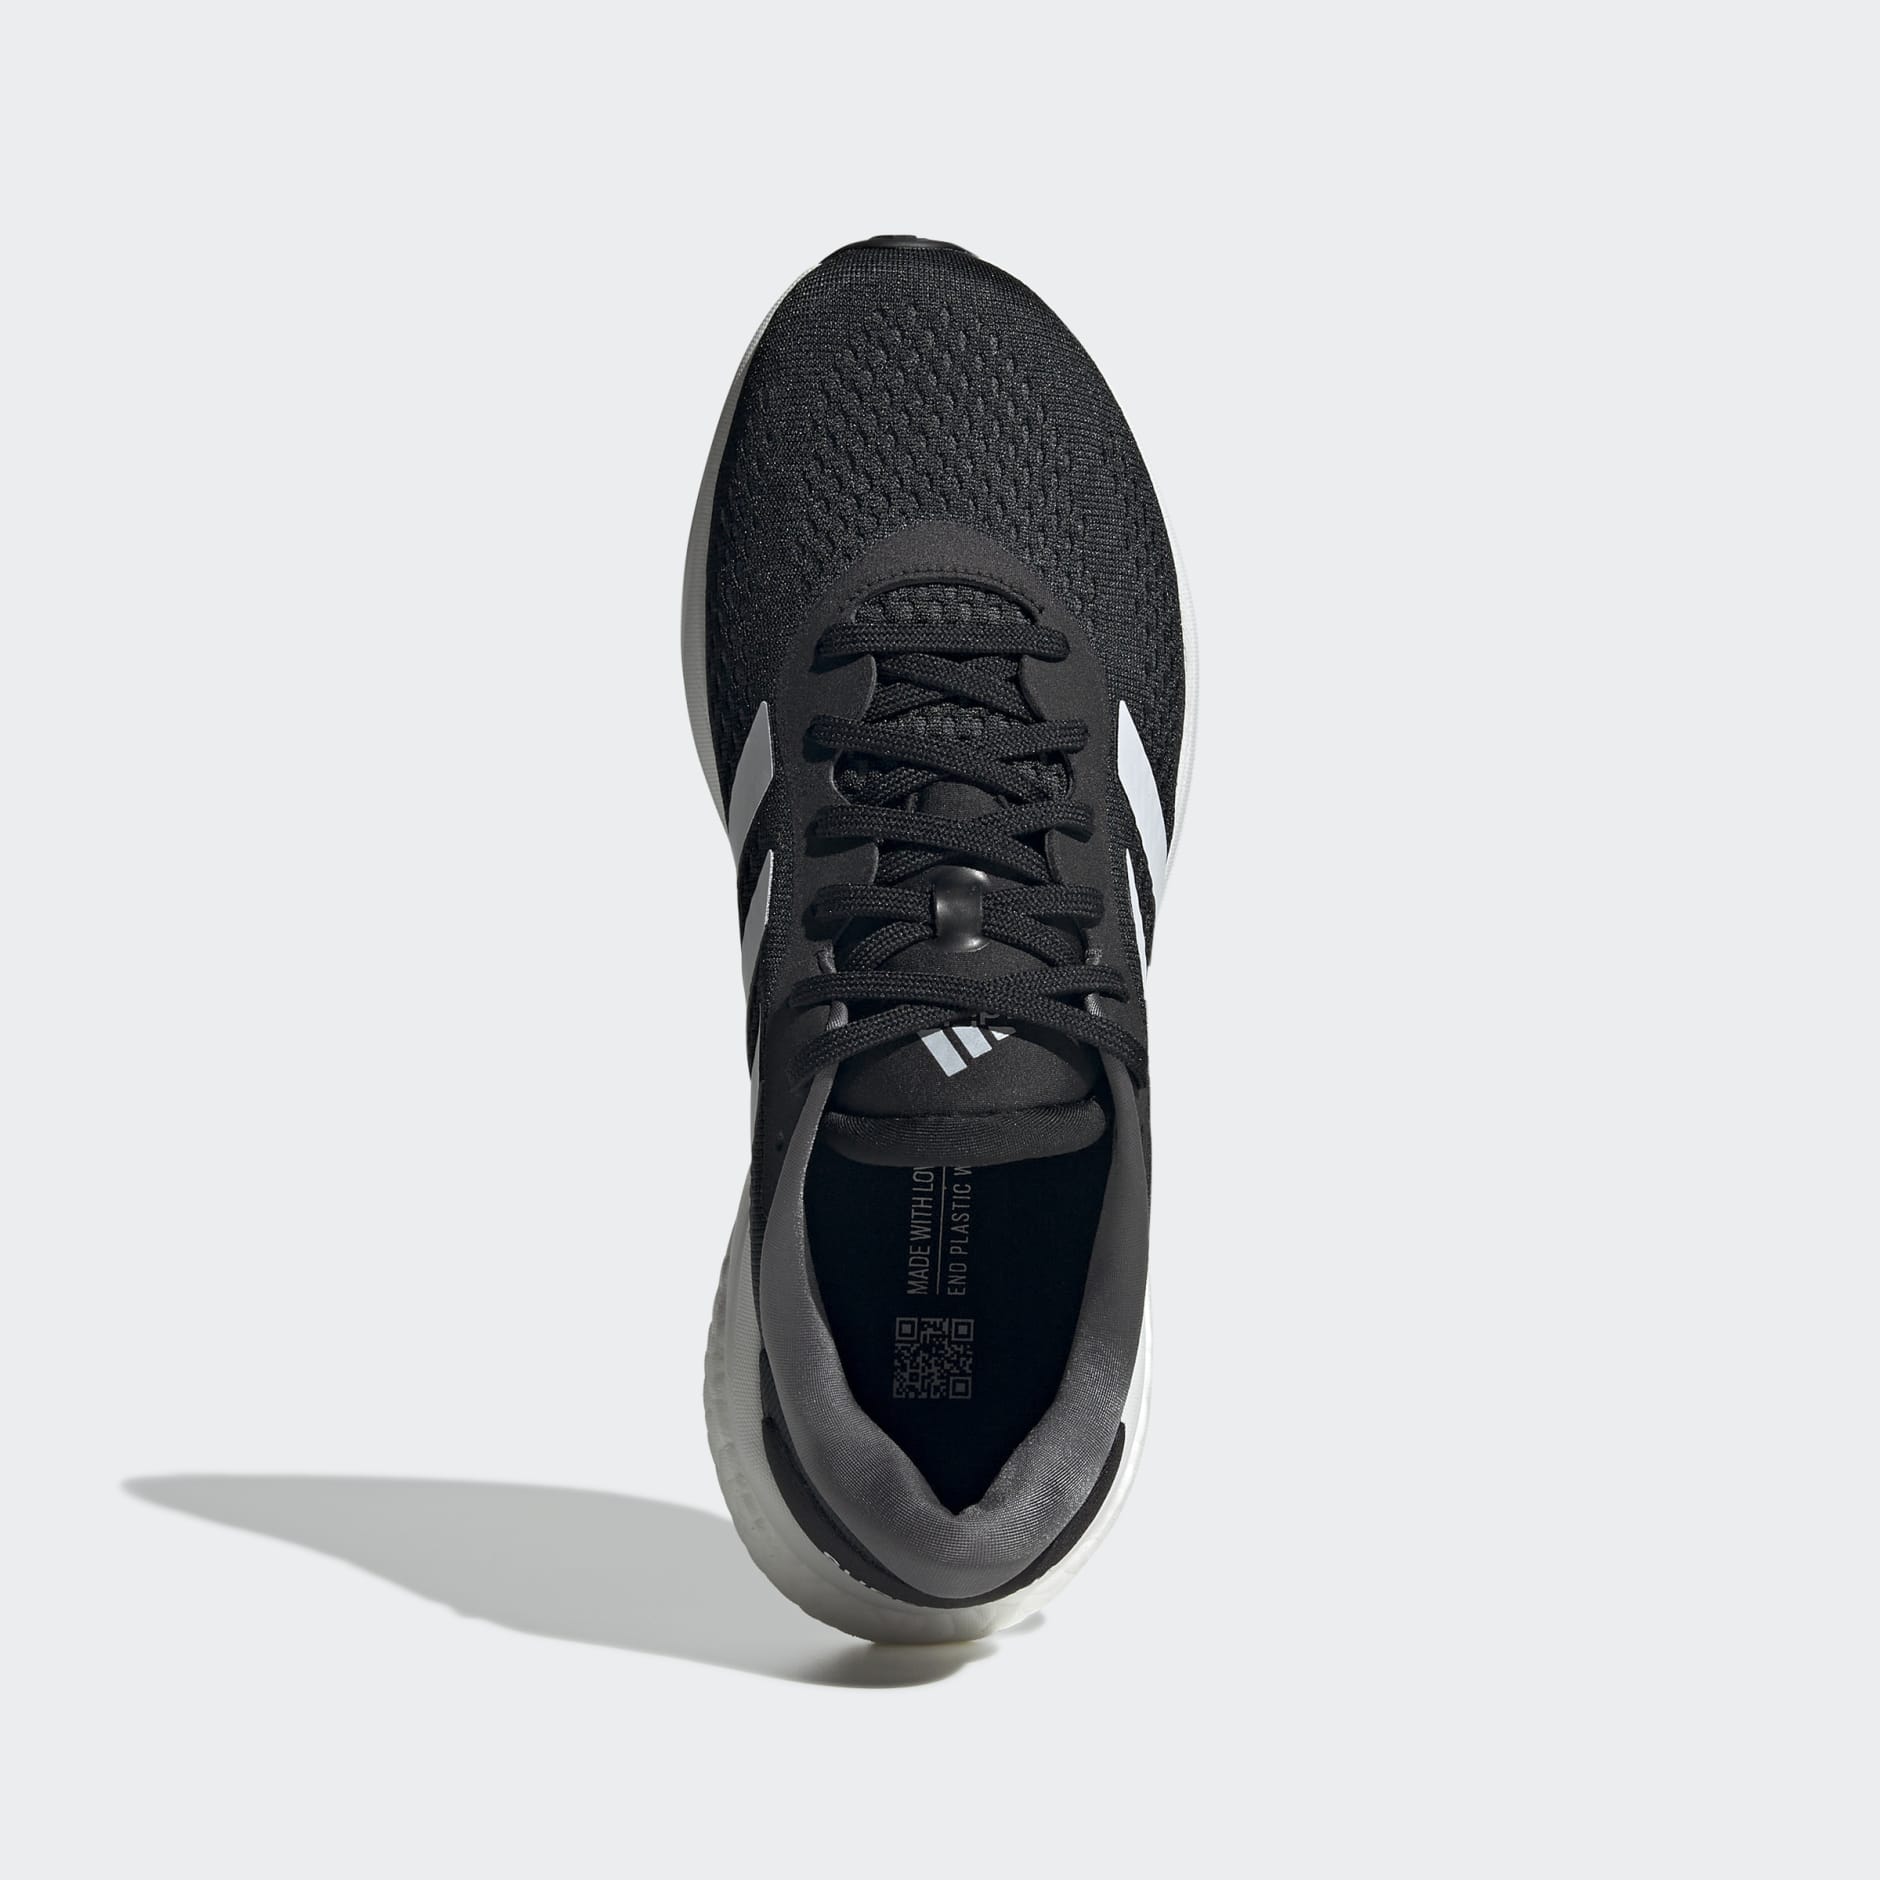 Shoes - Supernova 2 Running Shoes - Black | adidas South Africa